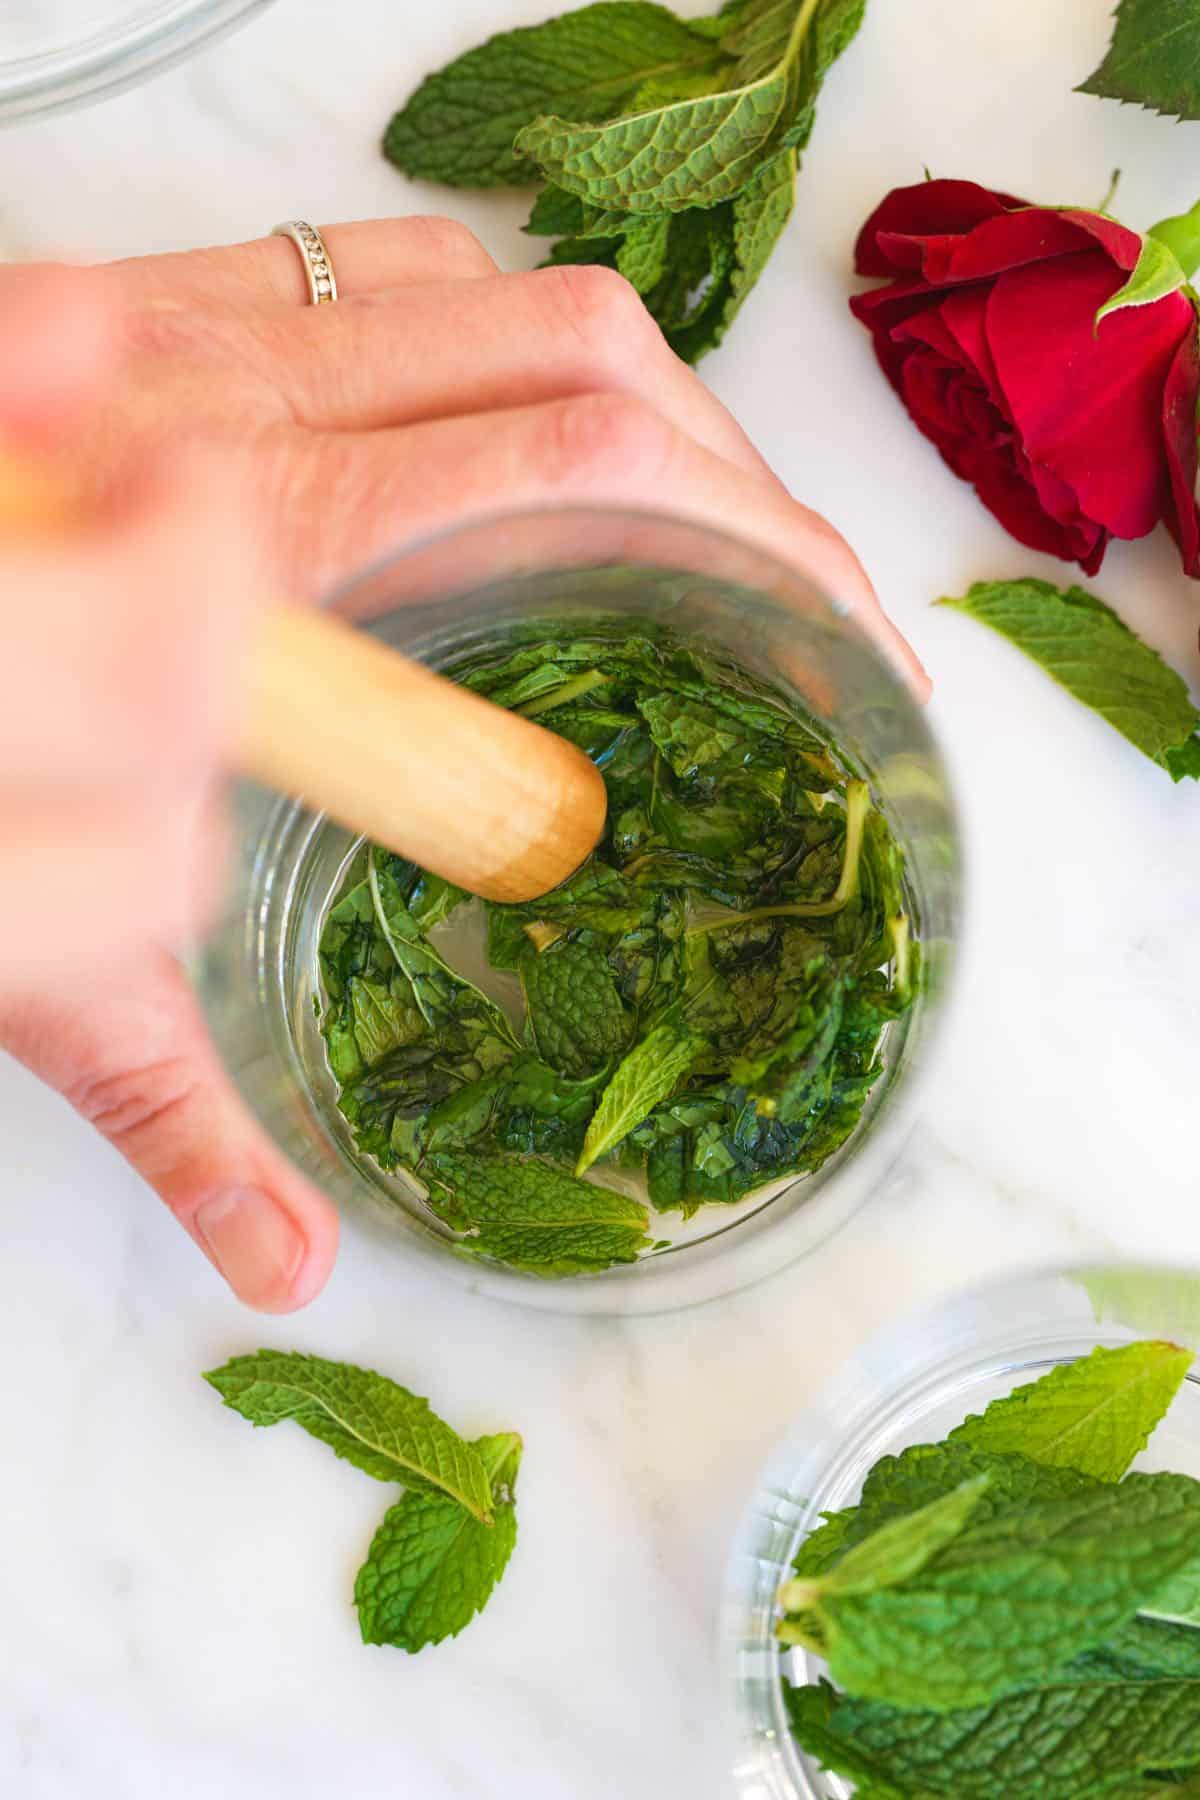 How to Make a Mint Julep - Muddling fresh mint with simple syrup